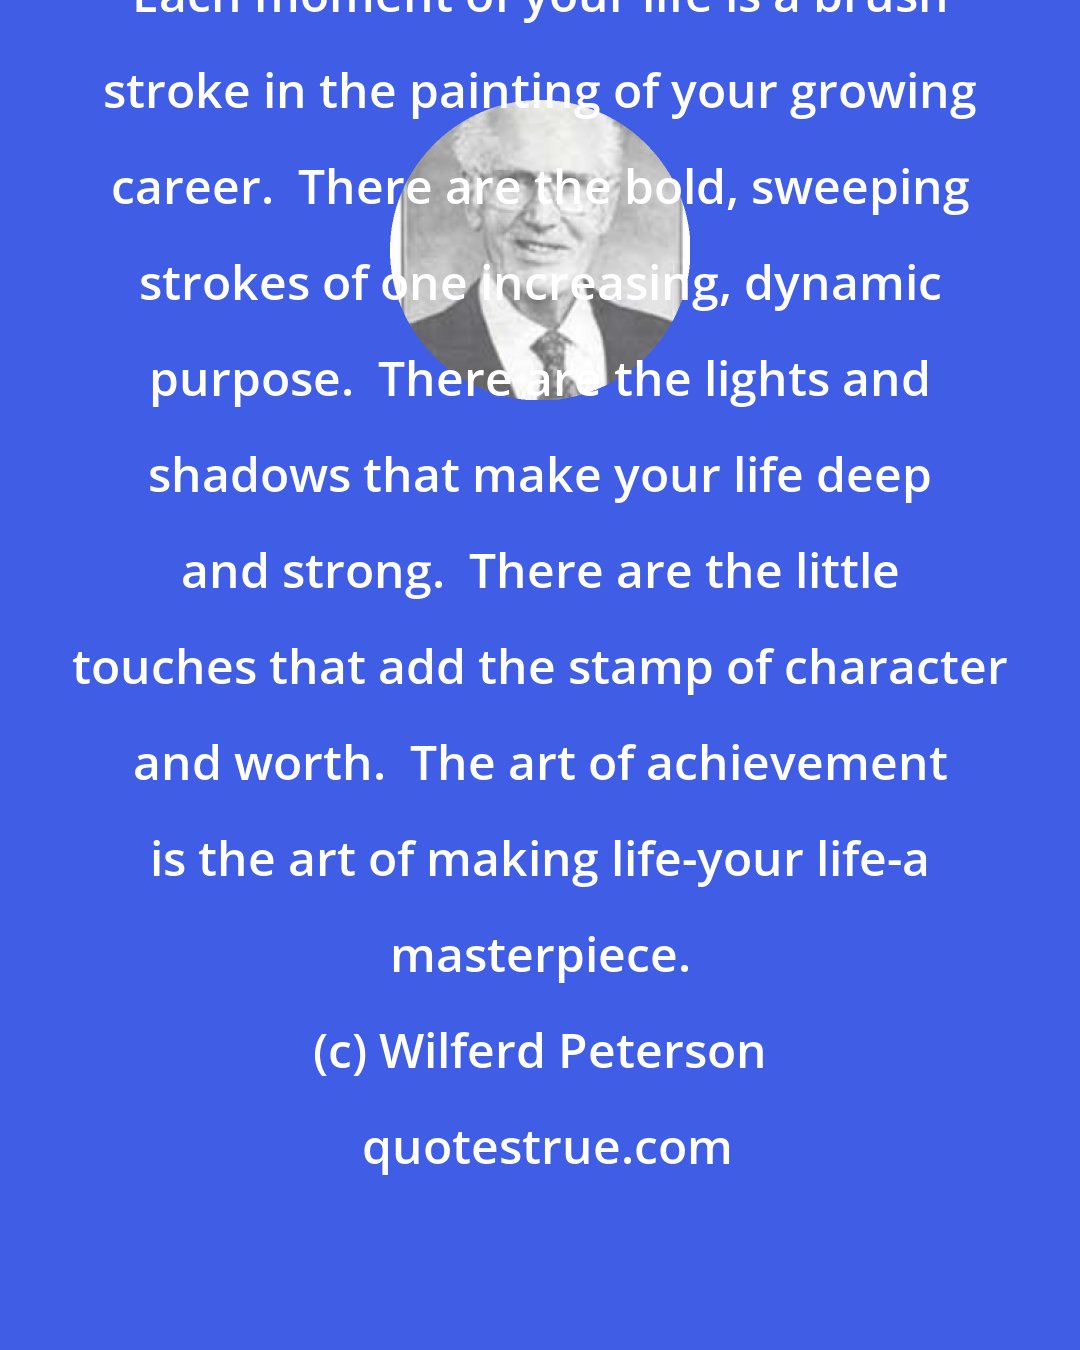 Wilferd Peterson: Each moment of your life is a brush stroke in the painting of your growing career.  There are the bold, sweeping strokes of one increasing, dynamic purpose.  There are the lights and shadows that make your life deep and strong.  There are the little touches that add the stamp of character and worth.  The art of achievement is the art of making life-your life-a masterpiece.